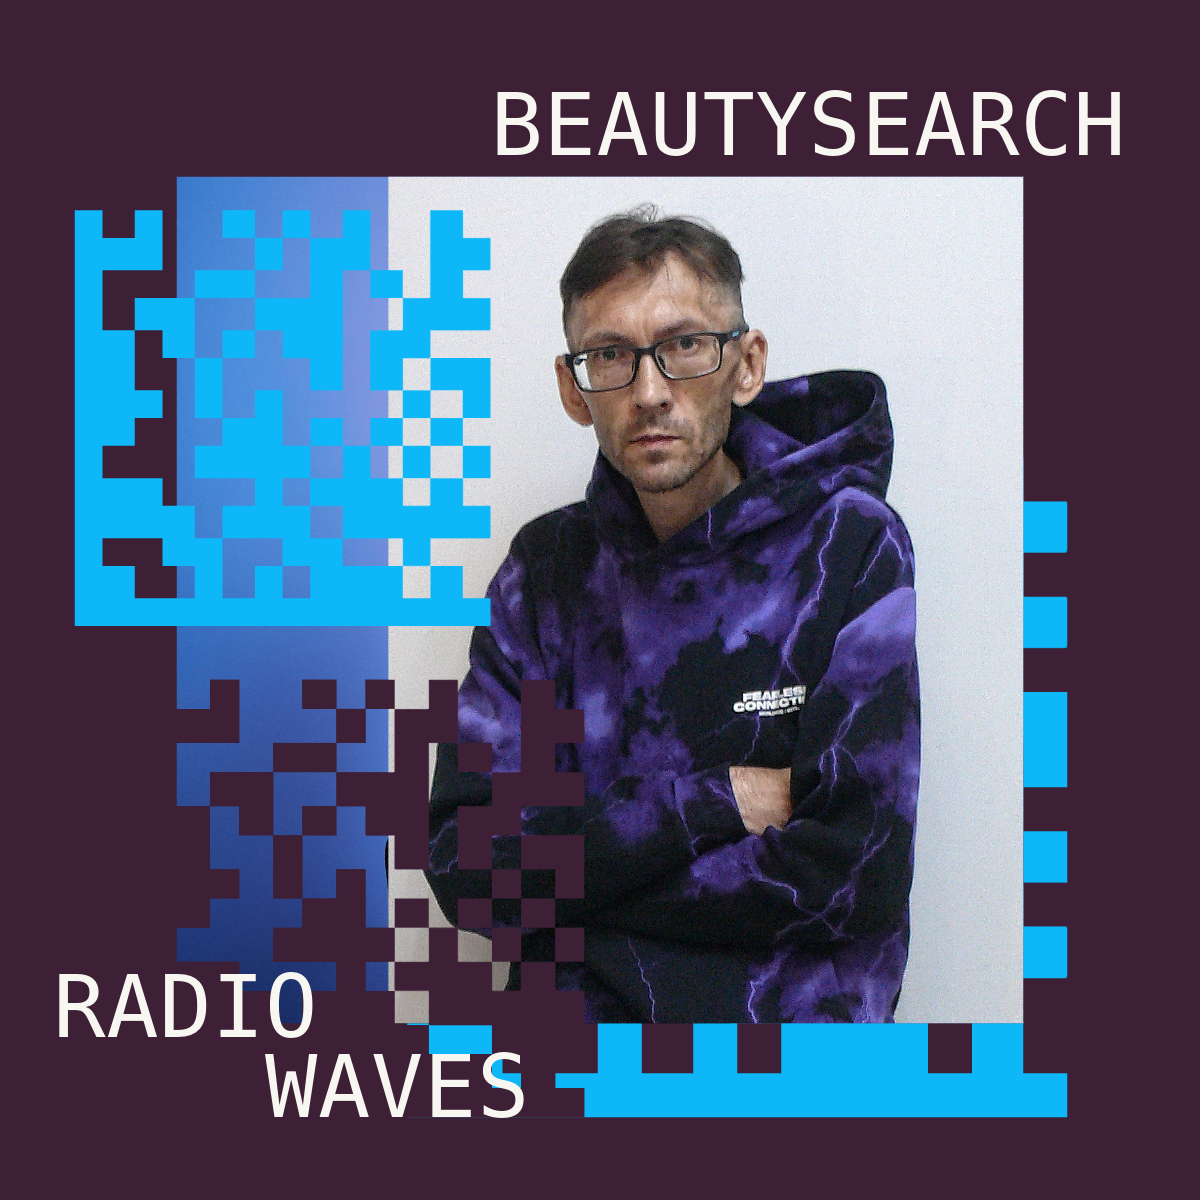 Radio Waves by beautySearch